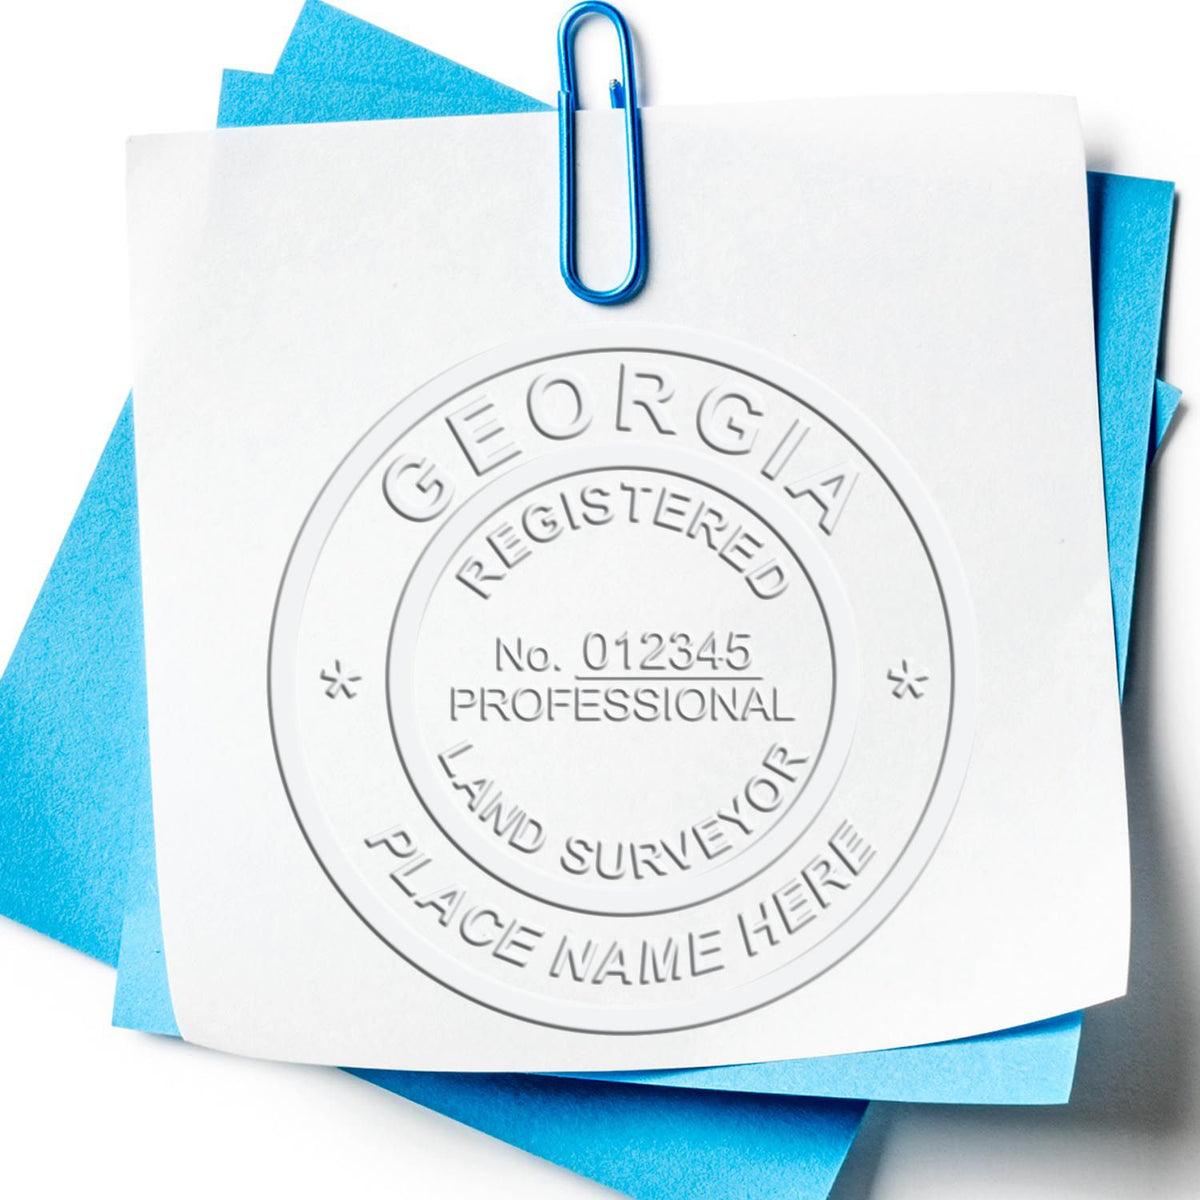 The Gift Georgia Land Surveyor Seal stamp impression comes to life with a crisp, detailed image stamped on paper - showcasing true professional quality.